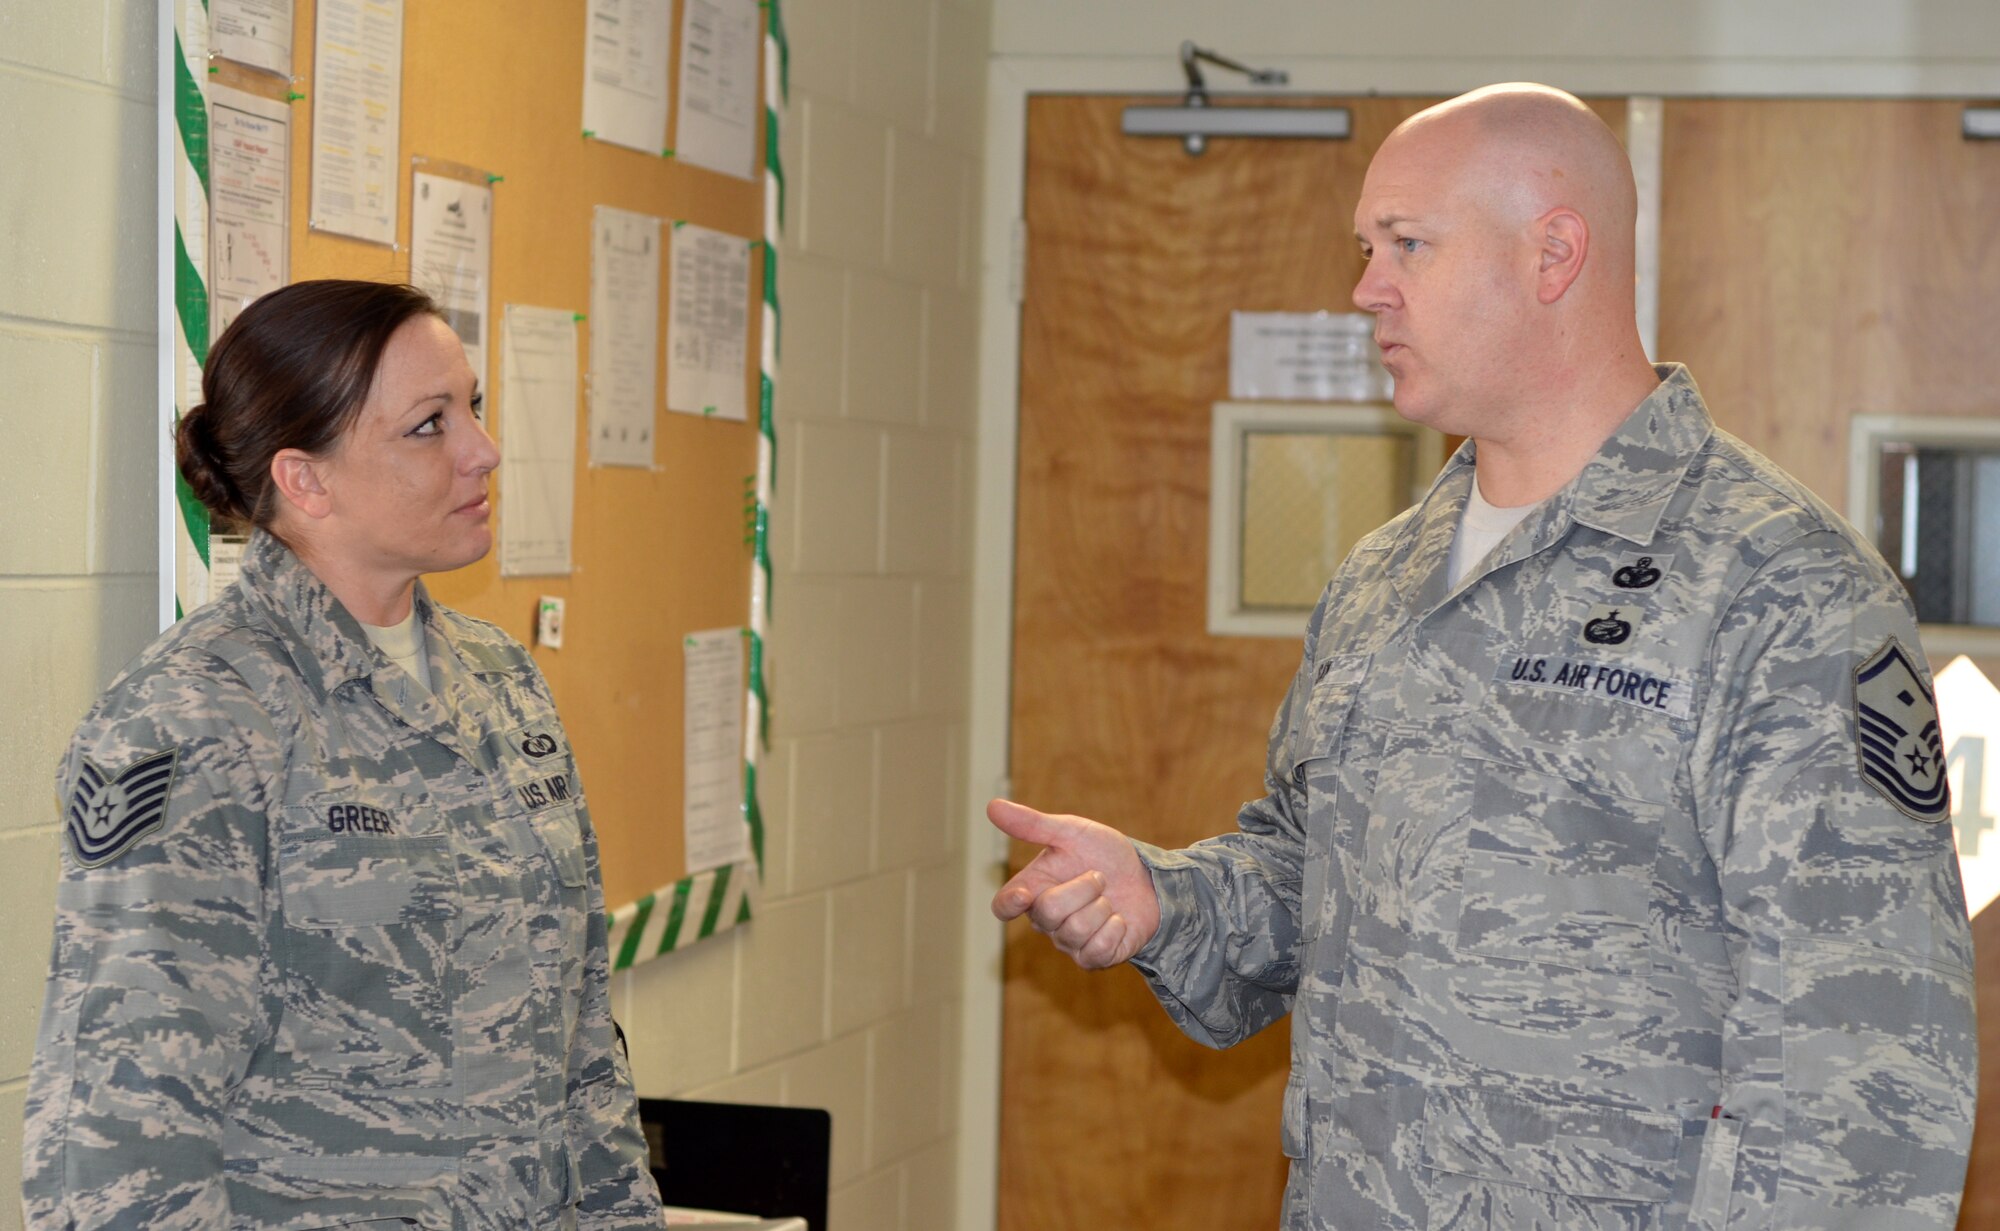 Master Sgt. David Say, Reserve first sergeant at the 920th Rescue Wing's Operational Support Squadron here, speaks with Tech. Sgt. Stacie Greer during a Unit Training Assembly. Say's primary job as the first sergeant is to hand out advice, help fix problems or find solutions, be the disciplinarian when necessary and generally watch out for the health and welfare of all members of the squadron. (U.S. Air Force photo/2nd Lt. Leslie Forshaw)